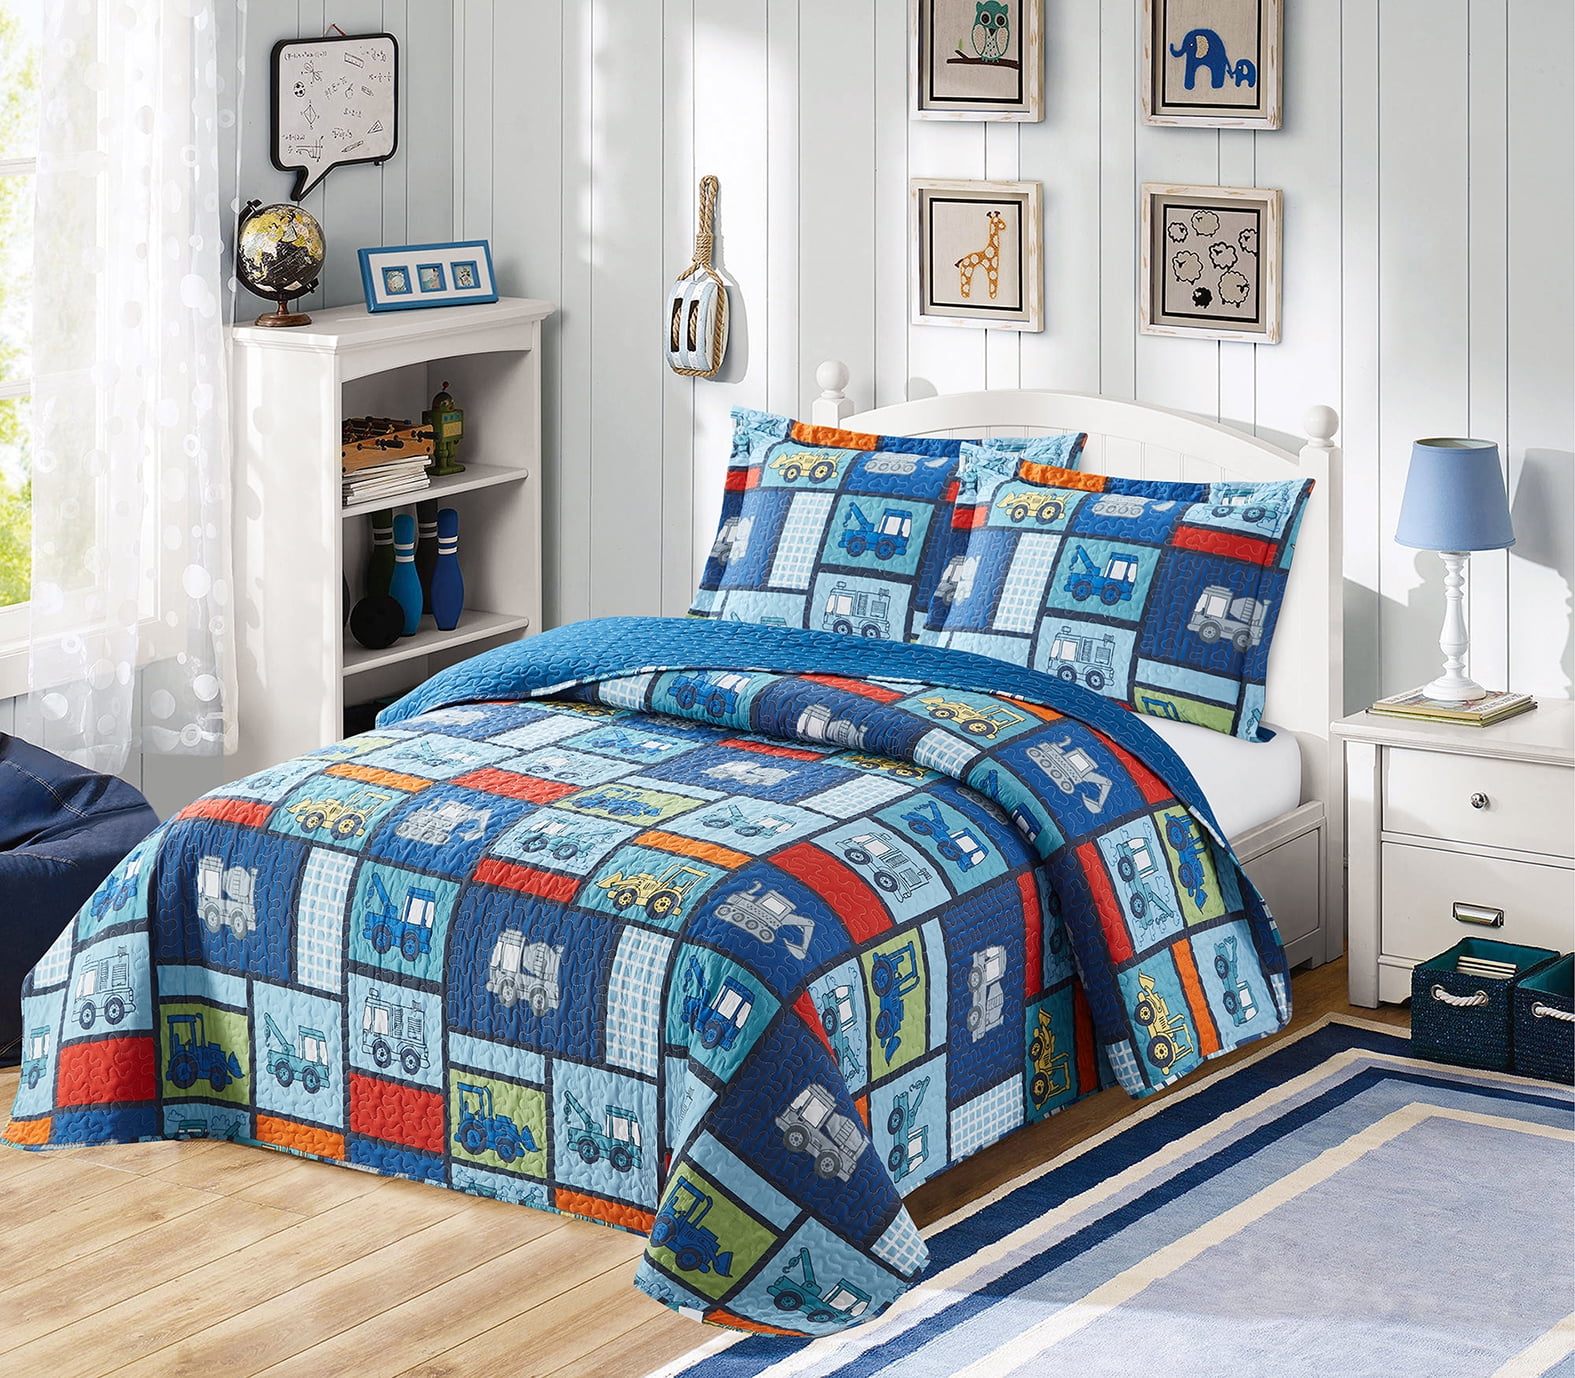 ,Trams,Buses,Trucks Van Printed Lightweight Quilt Set,Reversible Bedding Set for Boys Girls Children Twin,Green 3-Piece Kids Cartoon Multicolor Car Quilted Bedspread Coverlet Twin 86x68 Inches